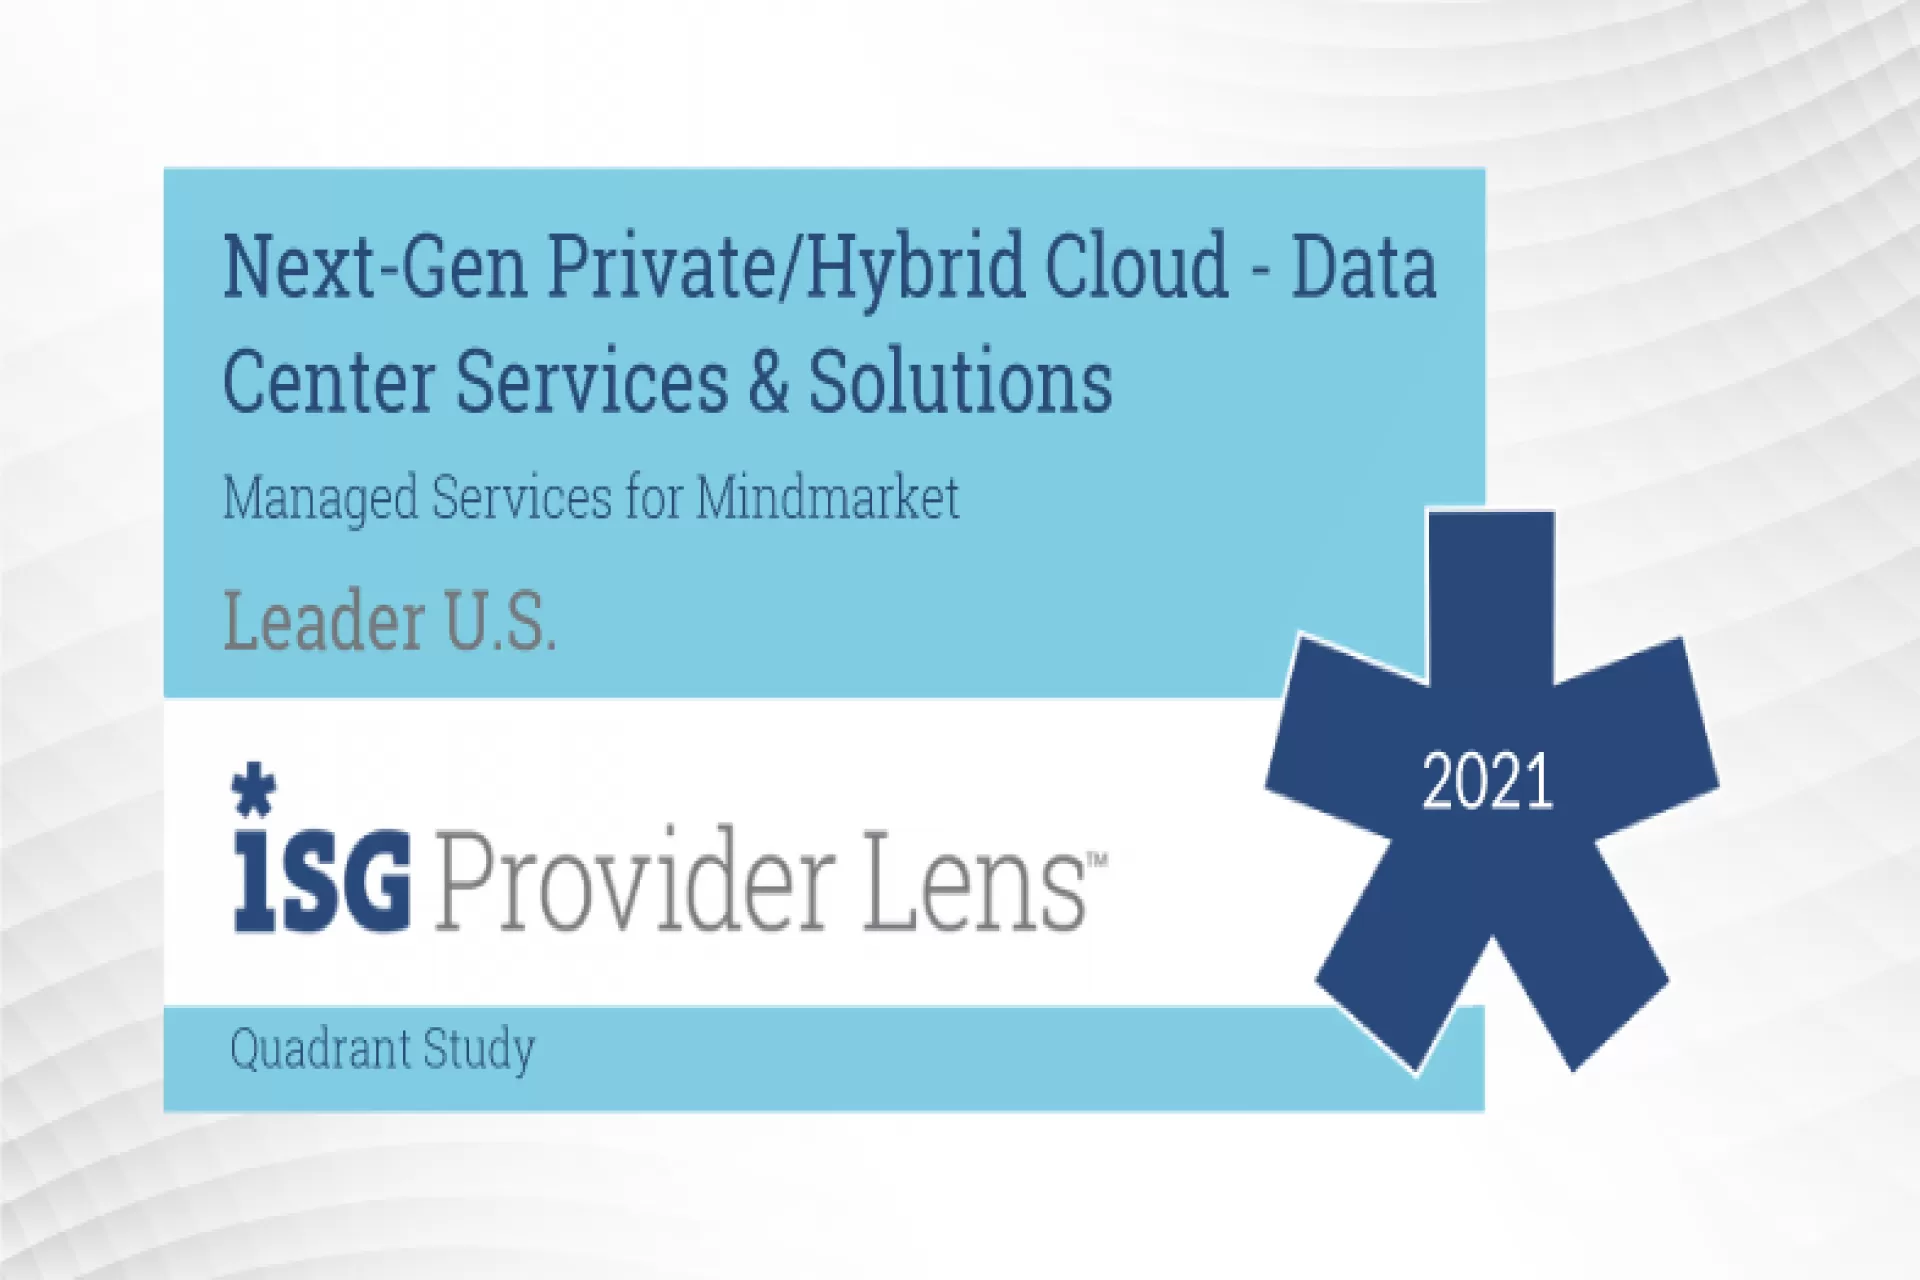 Zensar mentioned as Leader in ISG Provider Lens™ Quadrant Report for Managed Services - Midmarket in Next-Gen Private/Hybrid Cloud- Data Center Services and Solutions U.S. 2021